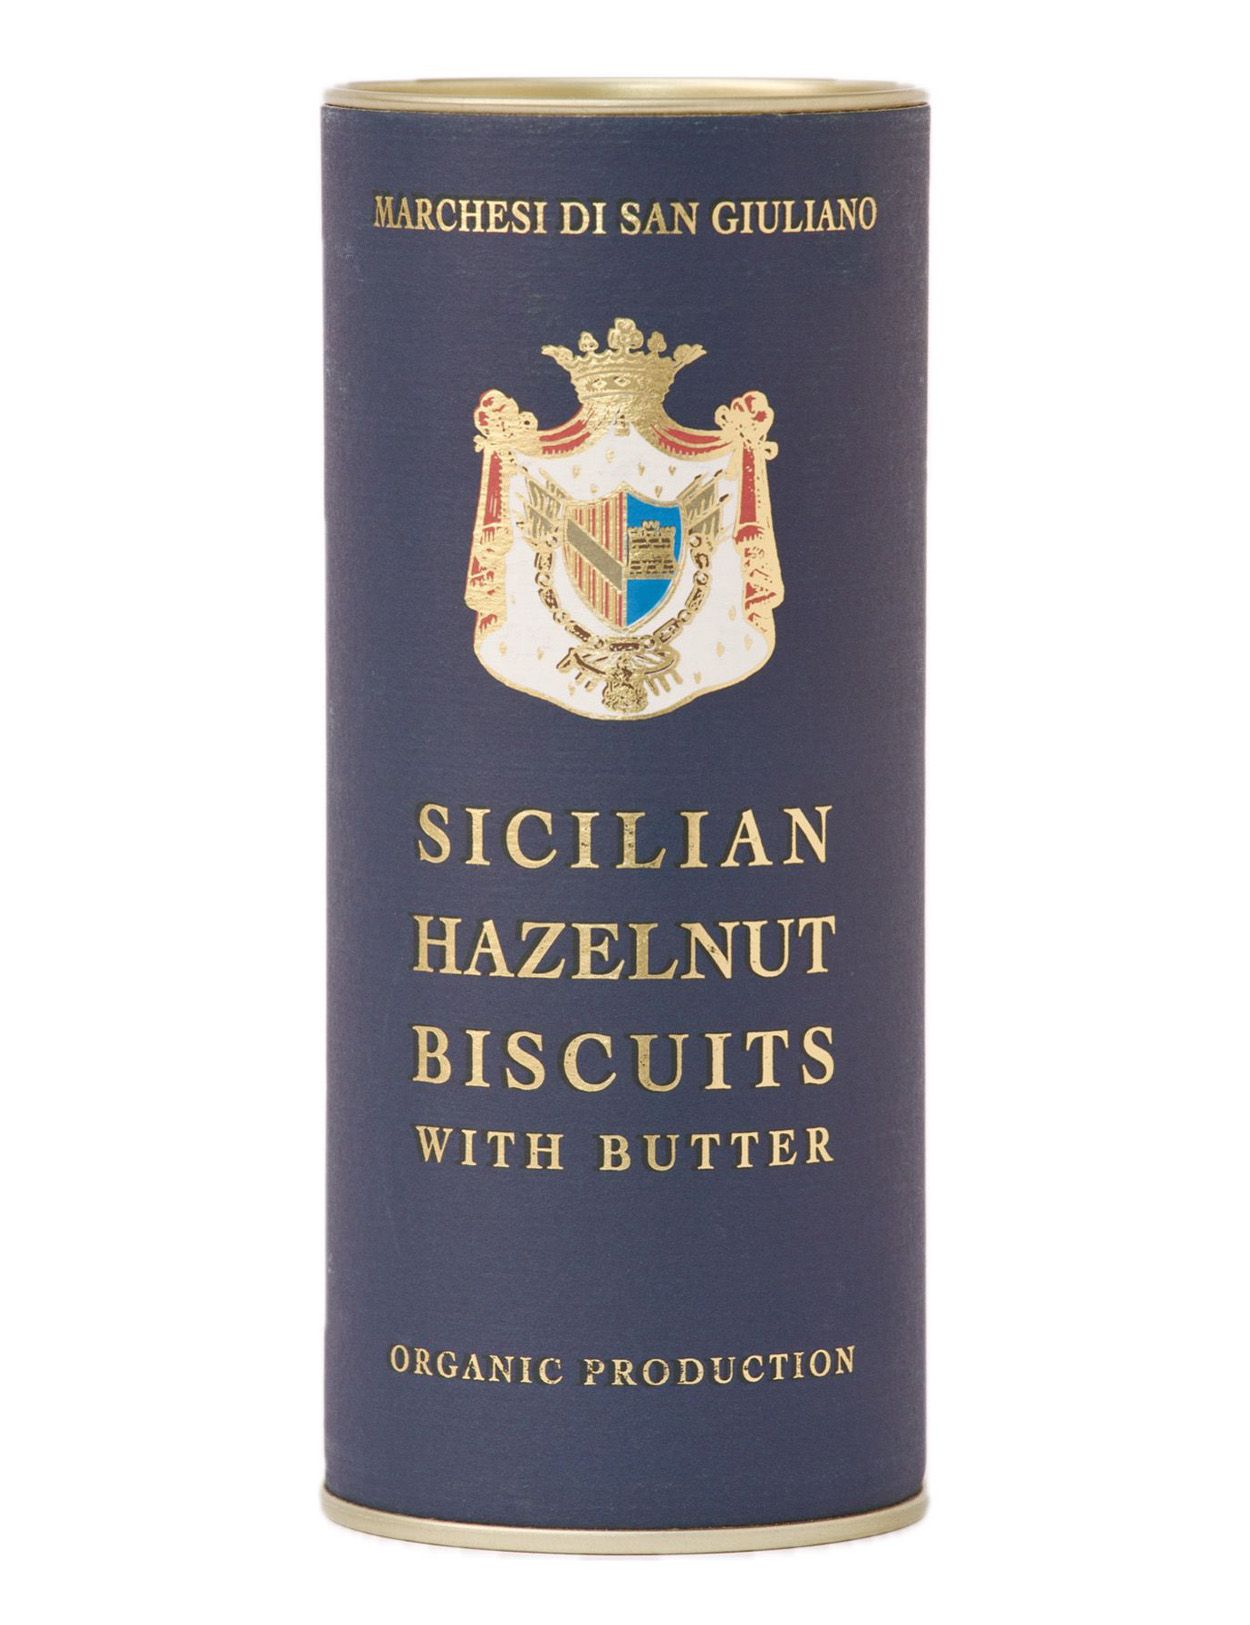 Sicilian Hazelnut Biscuits with Butter